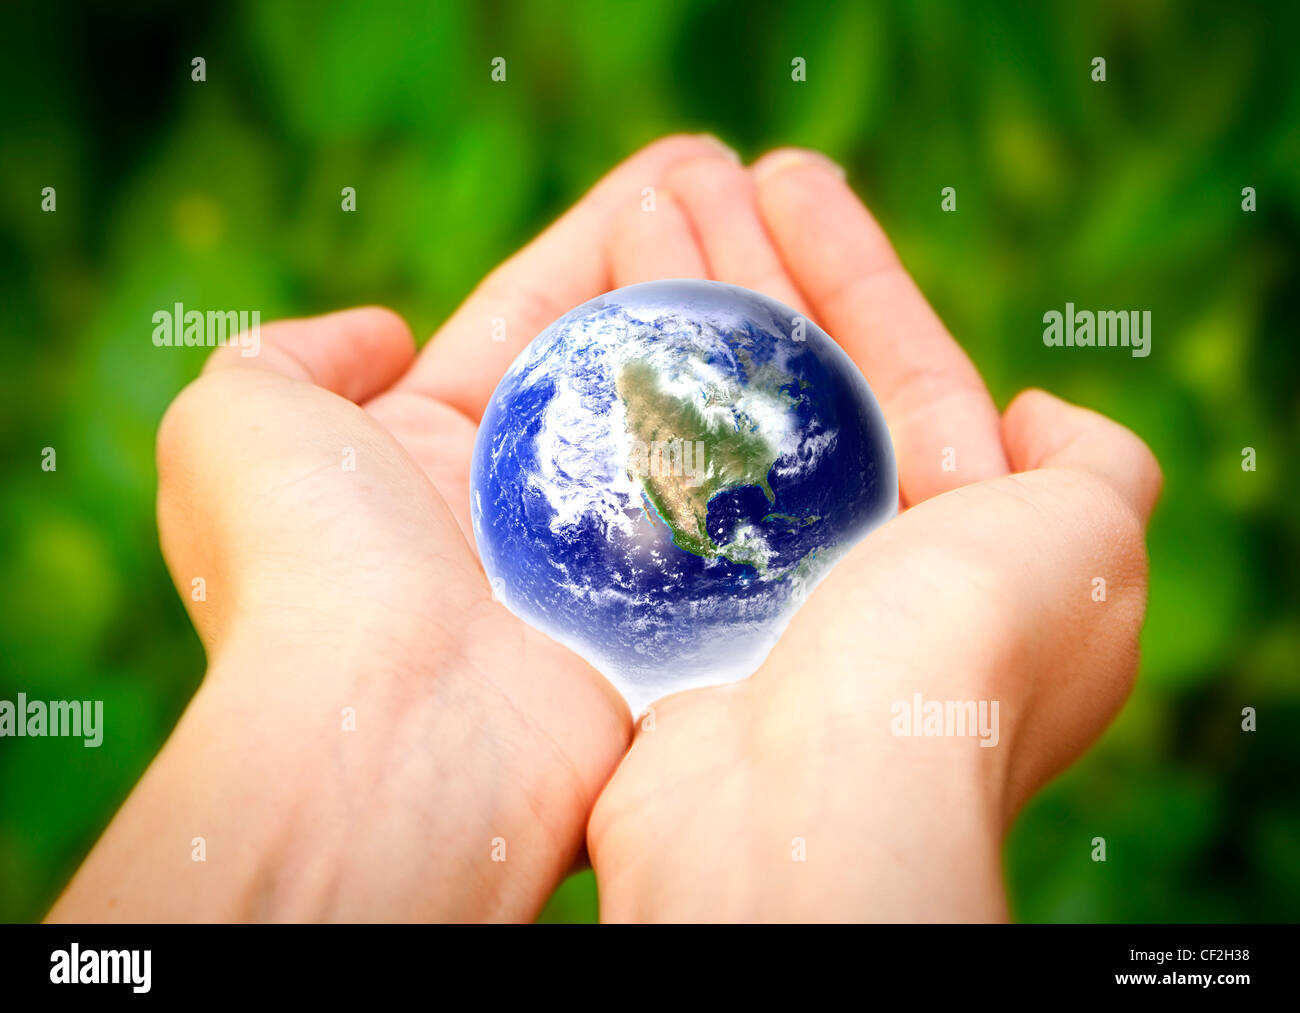 human hands carefully holding Earth planet. Glass World Stock Photo